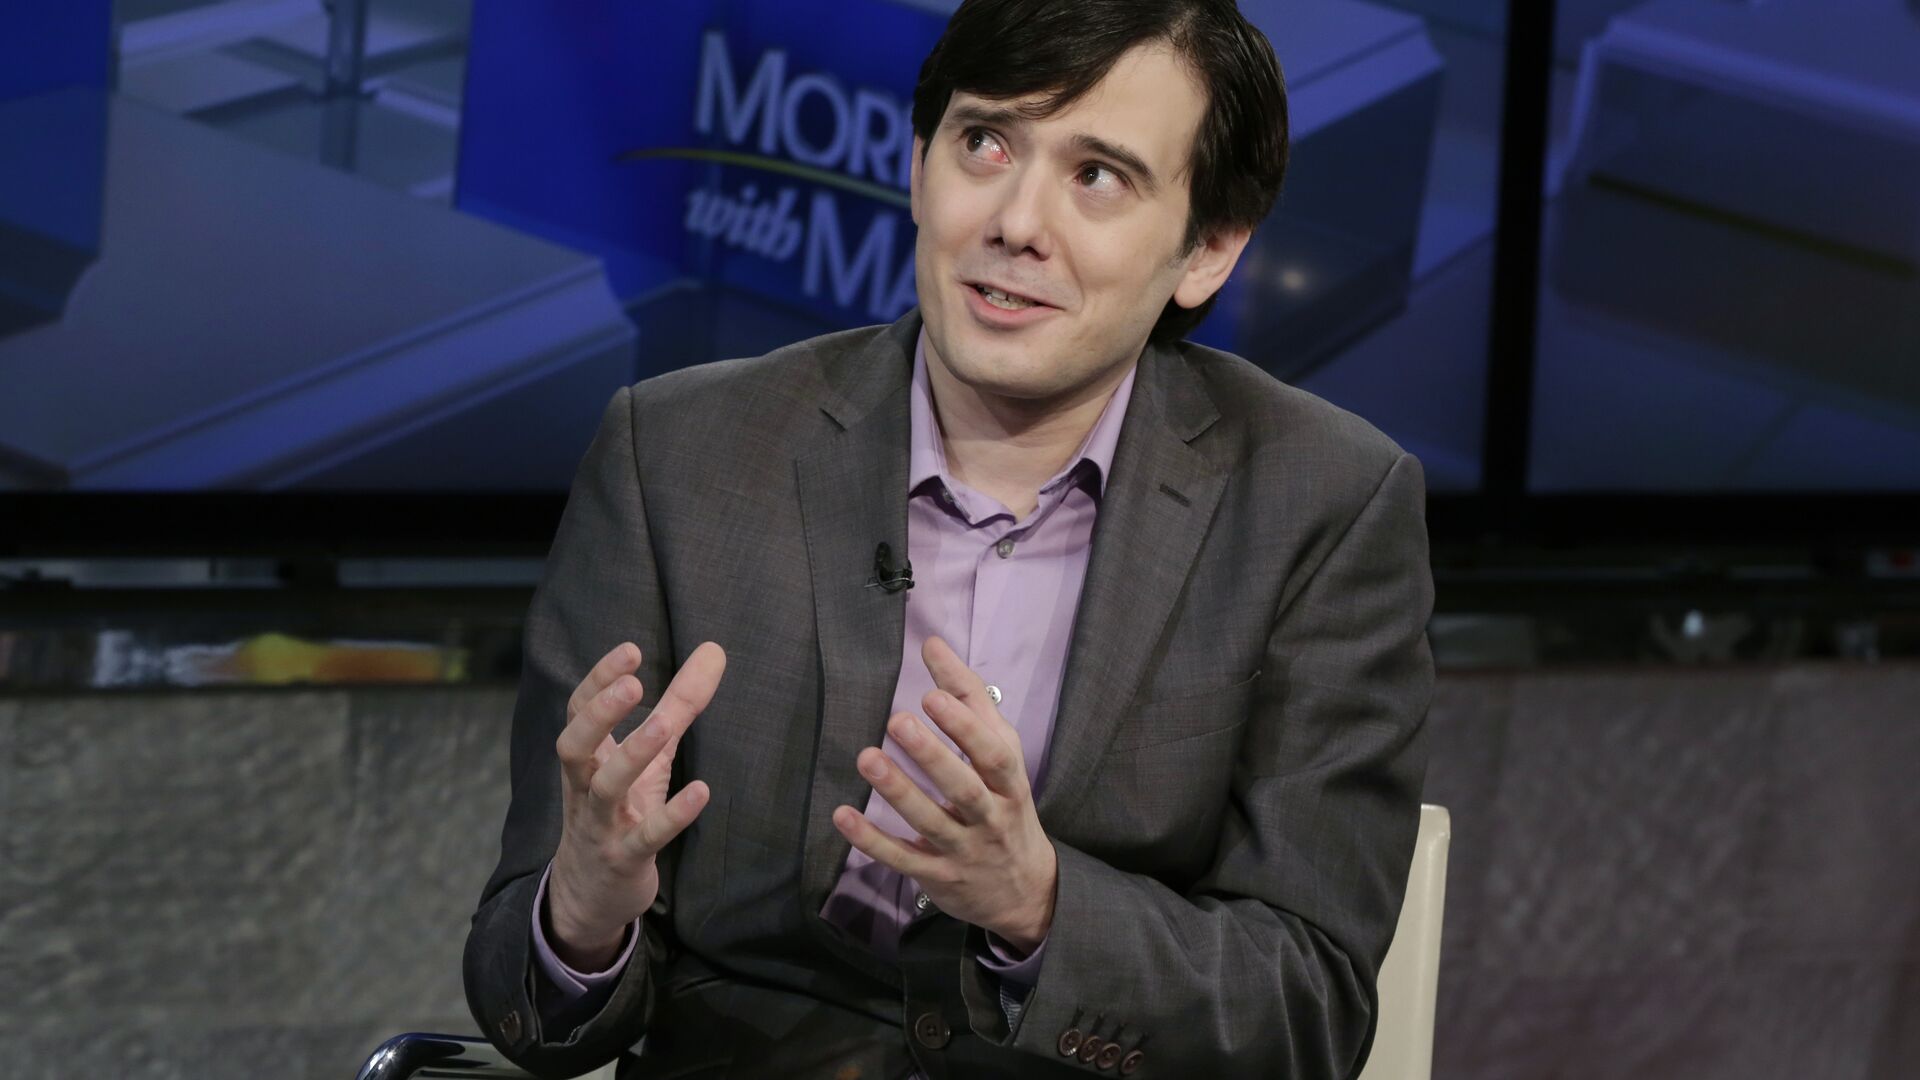 Former pharmaceutical CEO Martin Shkreli speaks during an interview by Maria Bartiromo during her Mornings with Maria Bartiromo program on the Fox Business Network, in New York, Tuesday, Aug. 15, 2017.  - Sputnik International, 1920, 14.01.2022